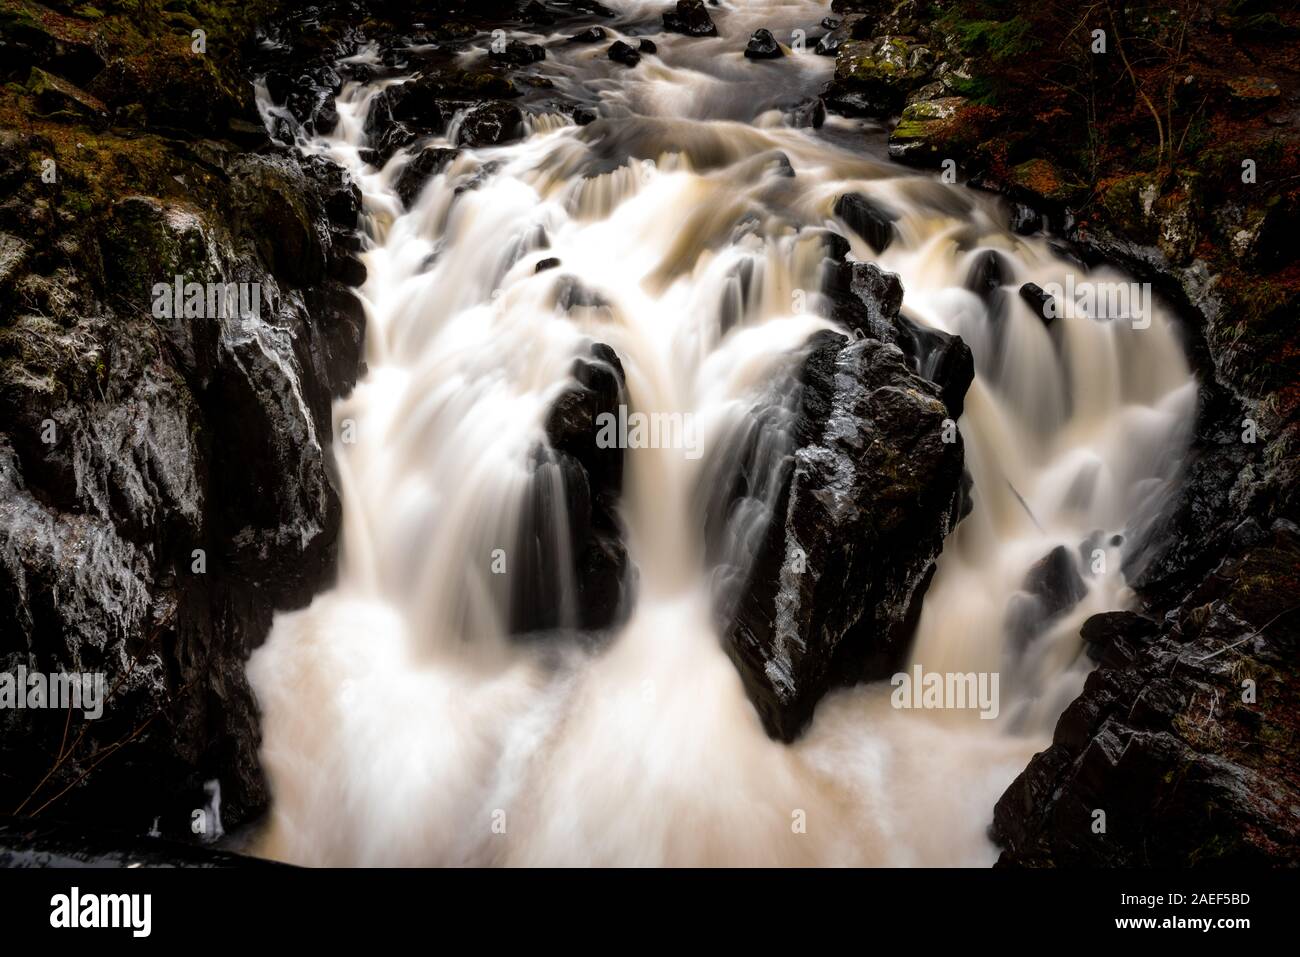 Frozen stones in Highland river Stock Photo